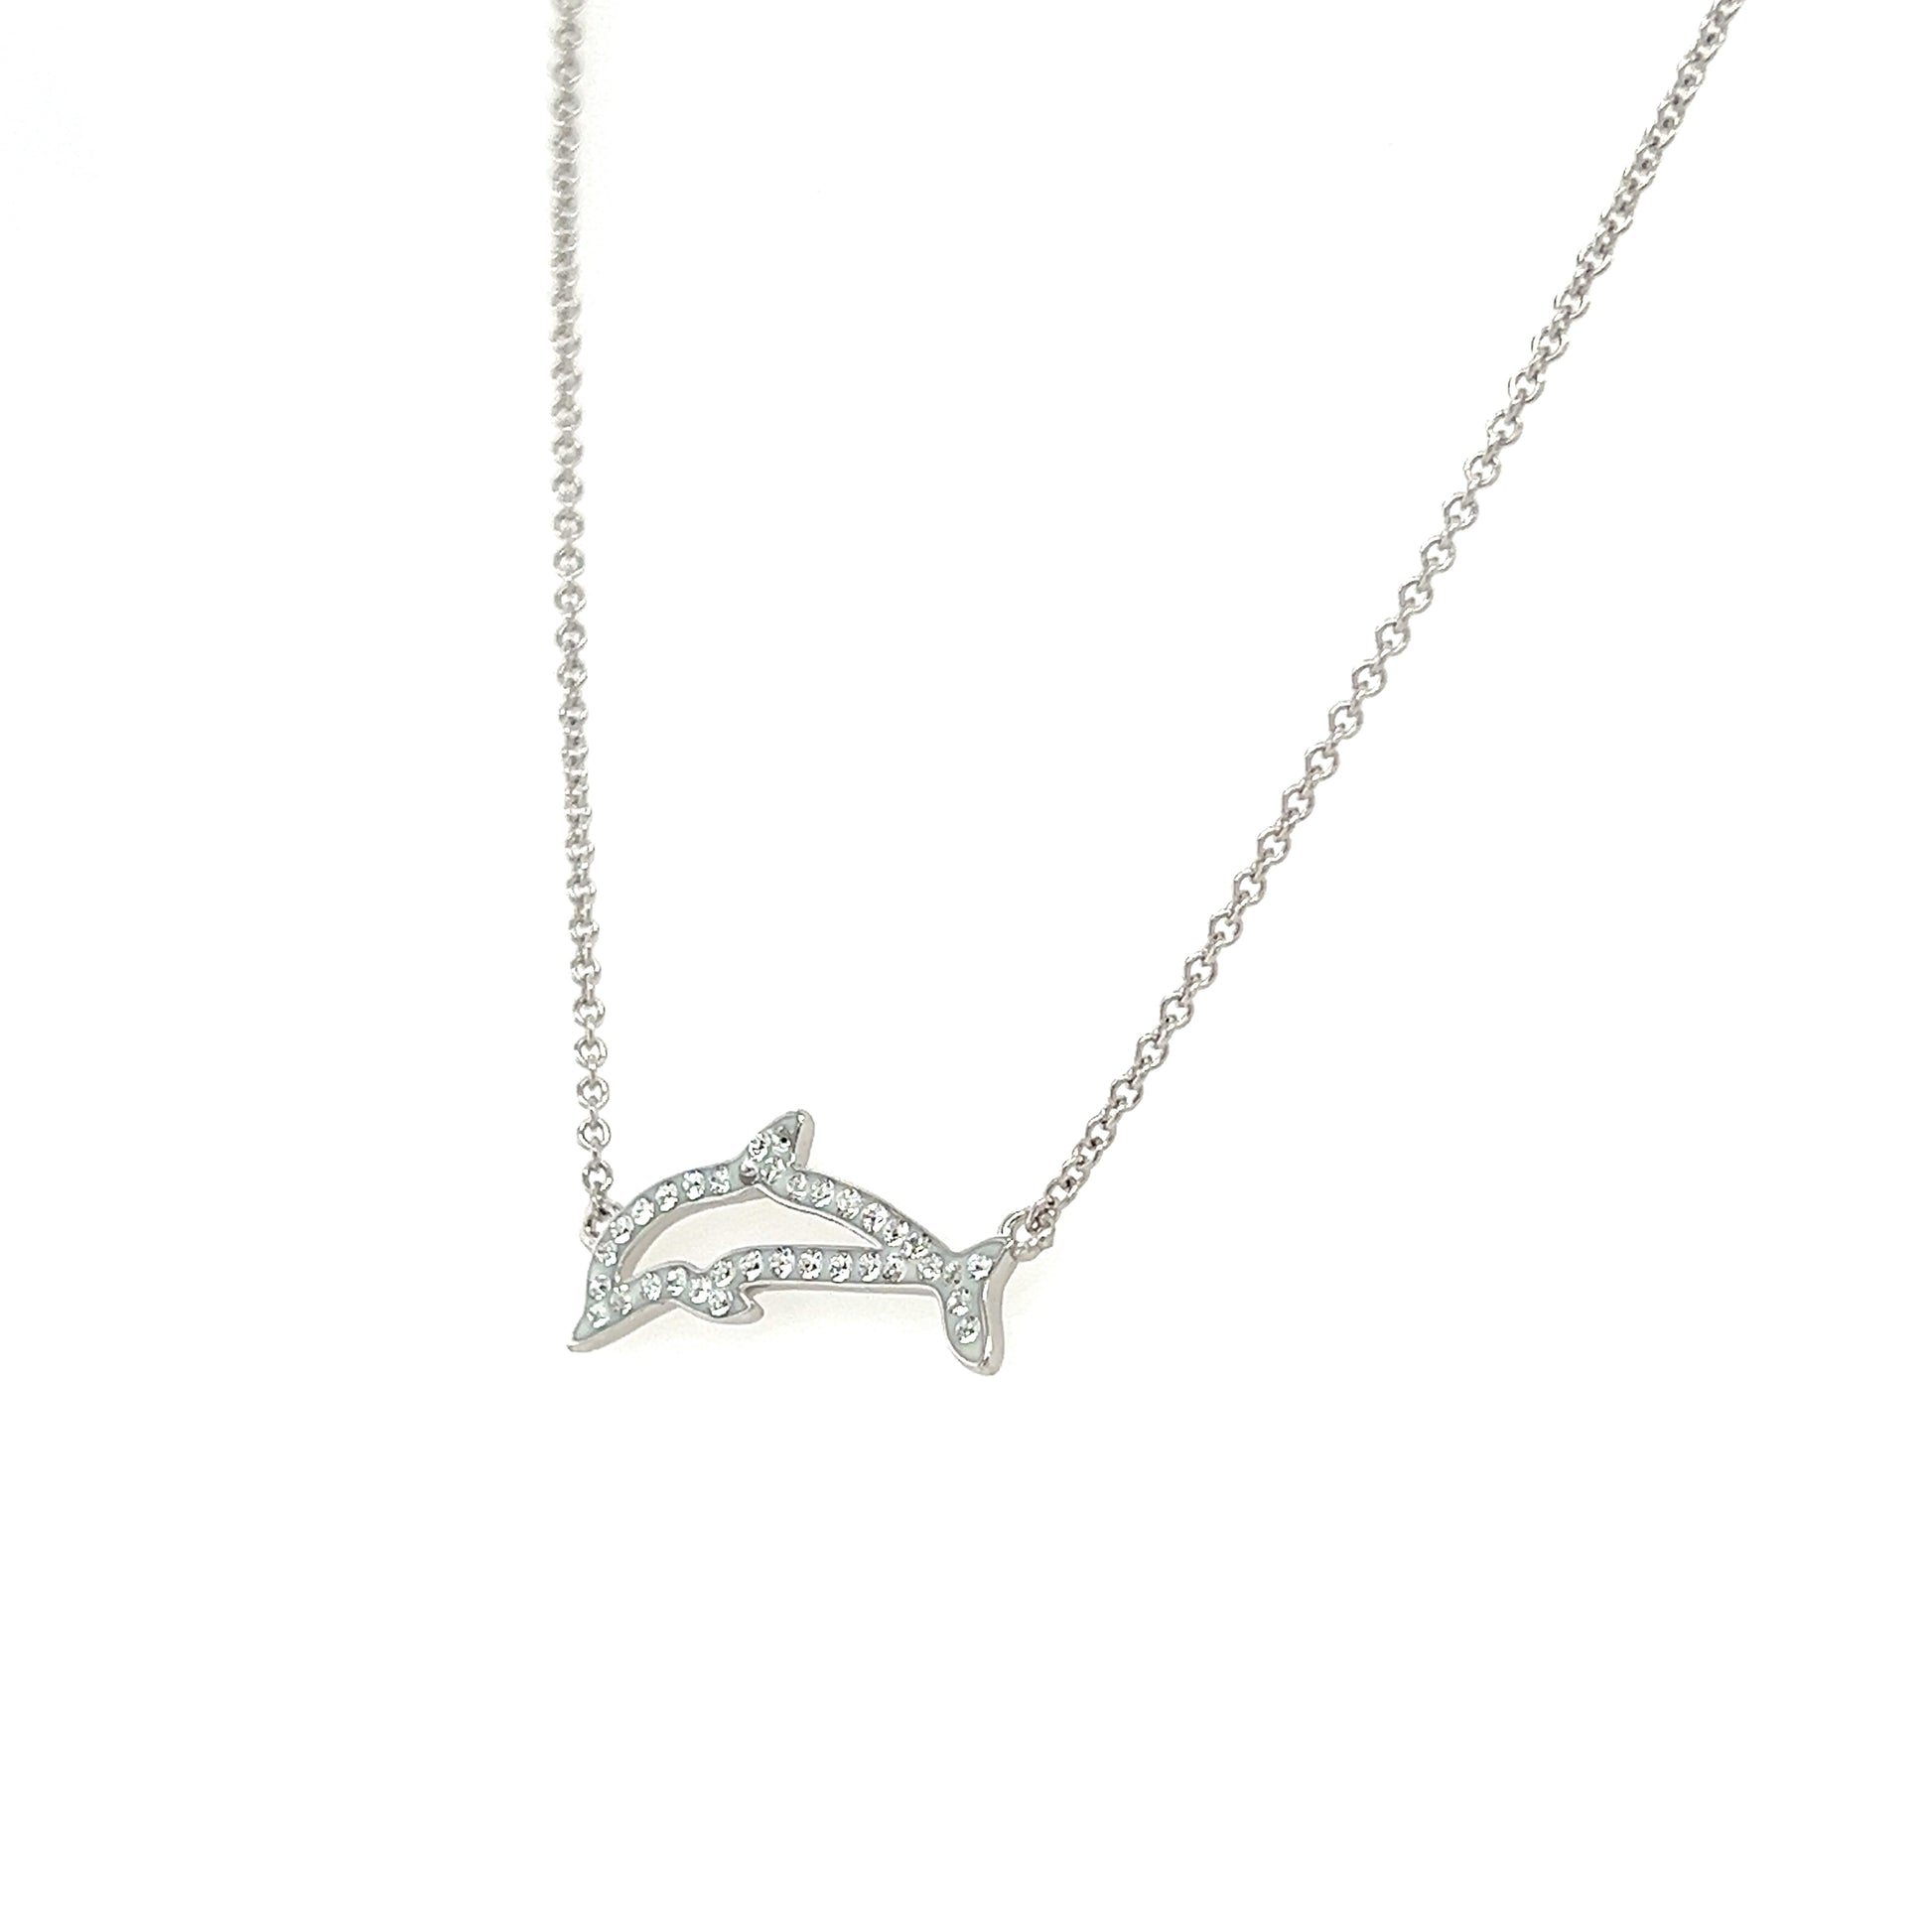 Dolphin Necklace with White Crystals in Sterling Silver Right Side View